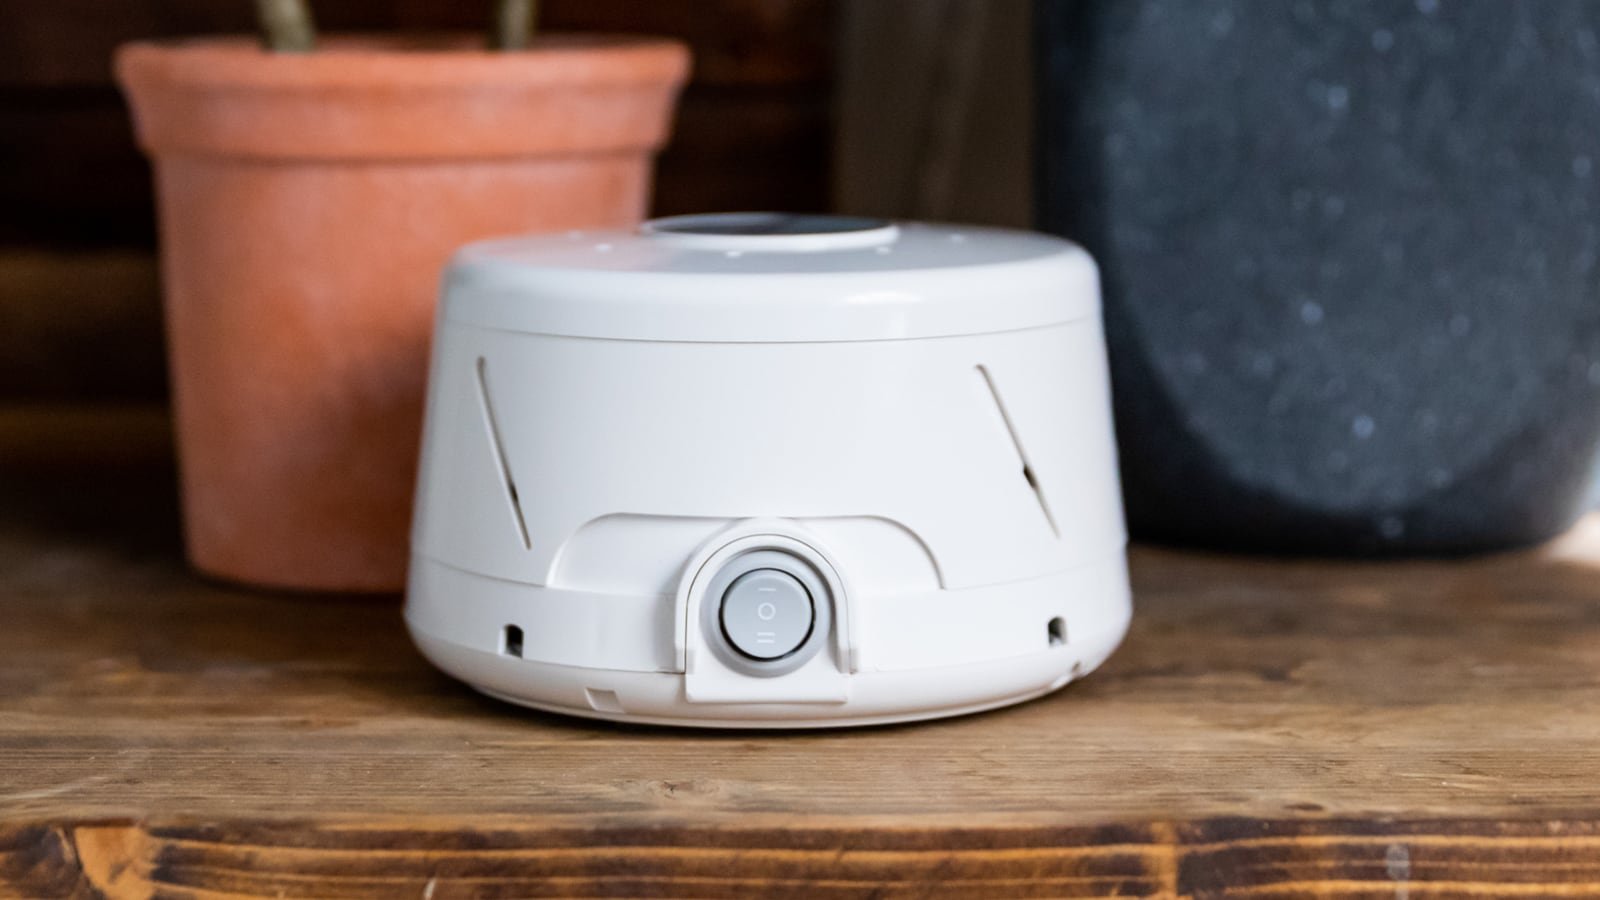 Dohm Classic Natural Sound Machine will help you get a better night’s sleep